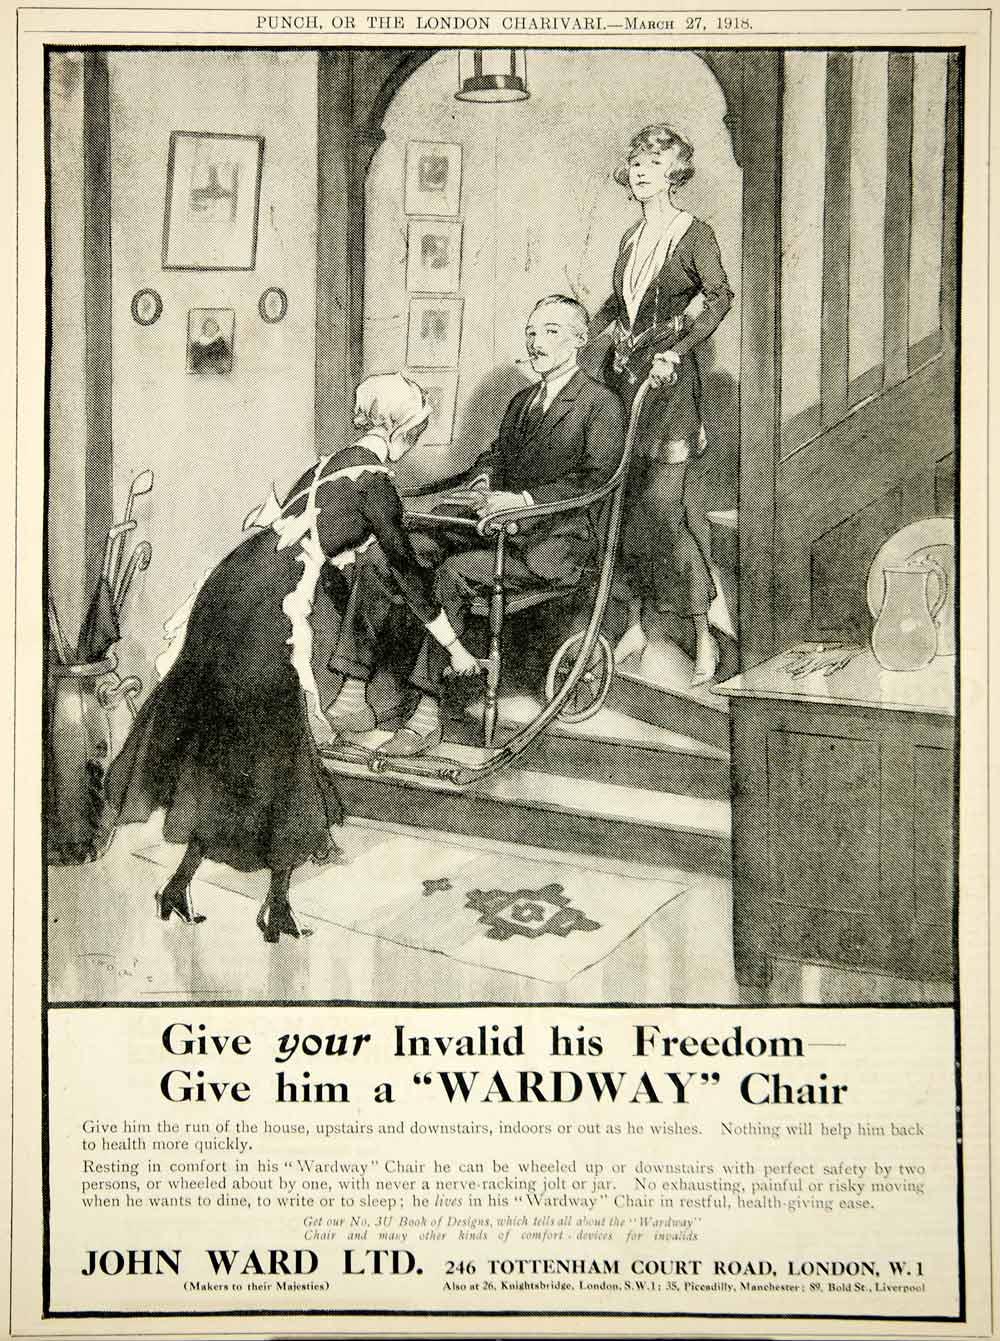 1918 Ad Antique Wardway Invalid Chair Wheelchair Stairs Disabled John Ward Ltd.